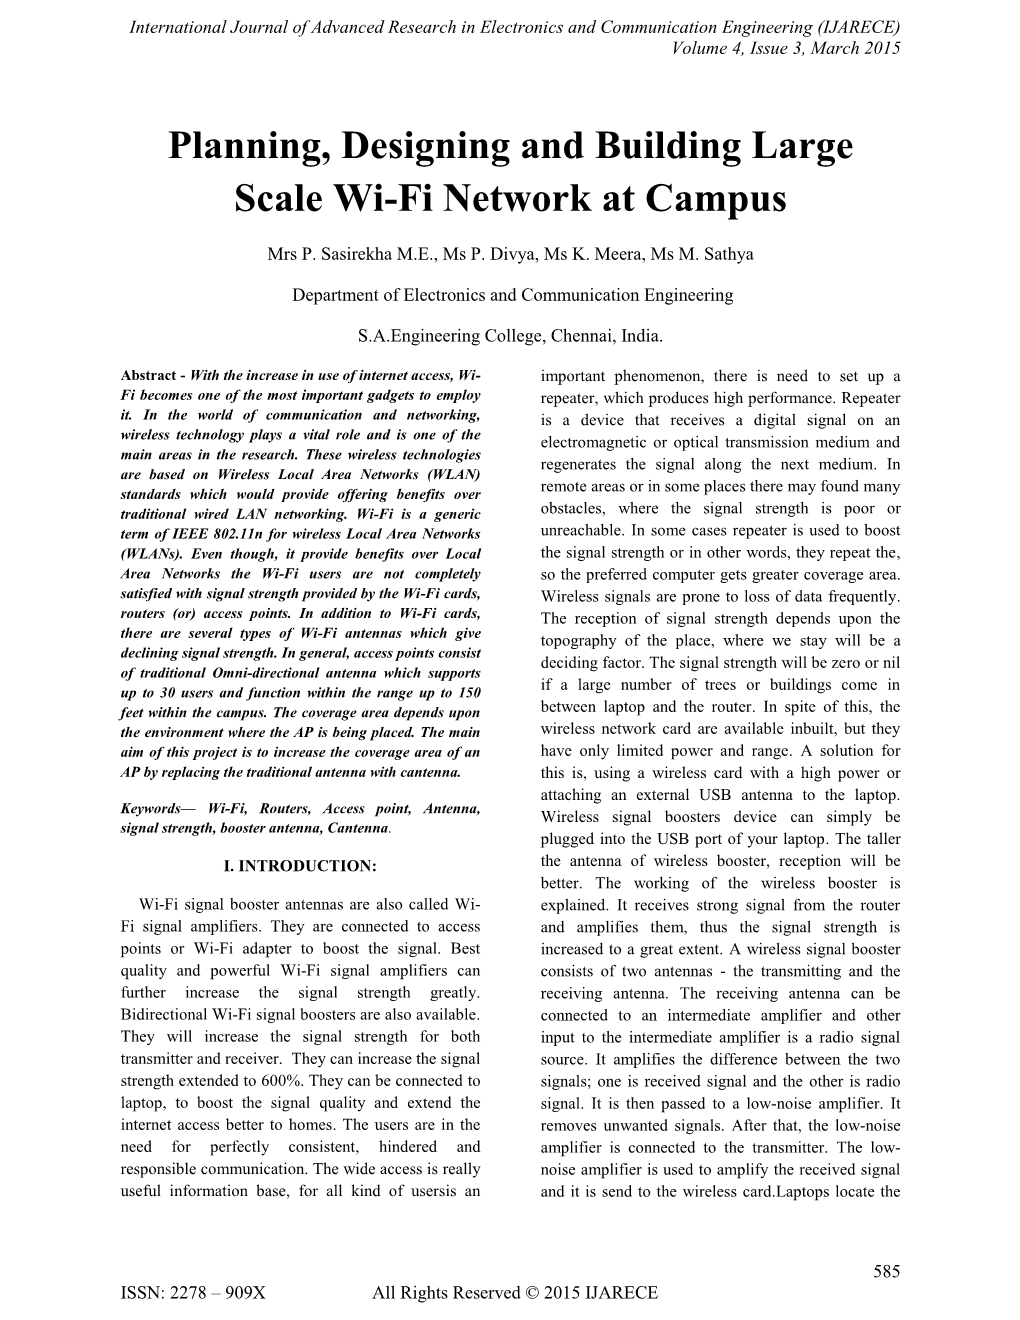 Planning, Designing and Building Large Scale Wi-Fi Network at Campus